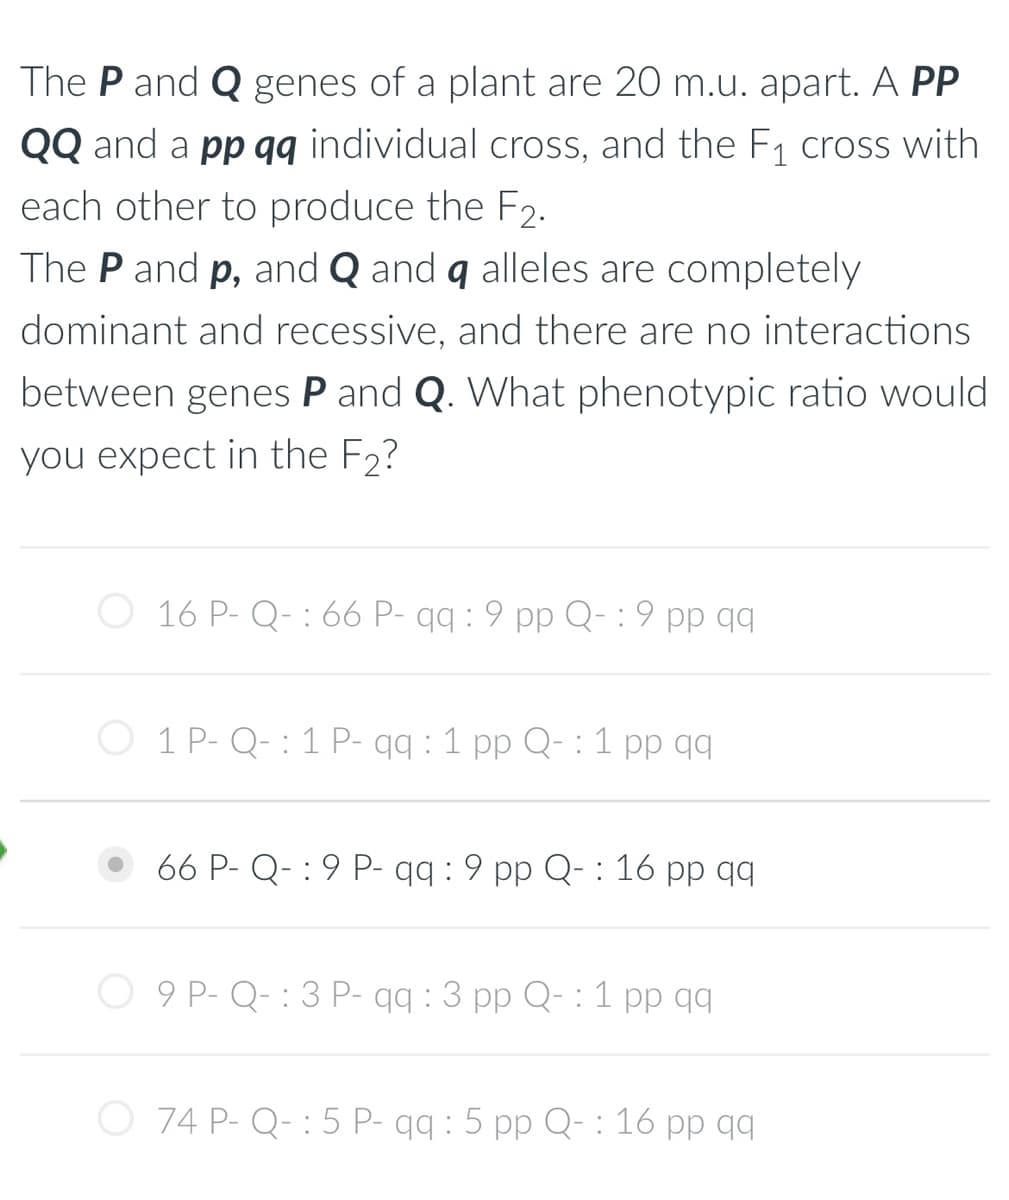 The P and Q genes of a plant are 20 m.u. apart. A PP
QQ and a pp qq individual cross, and the F₁ cross with
each other to produce the F2.
The P and p, and Q and q alleles are completely
dominant and recessive, and there are no interactions
between genes P and Q. What phenotypic ratio would
you expect in the F₂?
16 P- Q- 66 P- qq :9 pp Q- :9 pp qq
:
1 P-Q-1 P- qq : 1 pp Q: 1 pp qq
66 P- Q-9 P- qq : 9 pp Q-:16 pp qq
O 9 P-Q- : 3 P- qq: 3 pp Q: 1 pp qq
O 74 P-Q-:5 P- qq: 5 pp Q-:16 pp qq